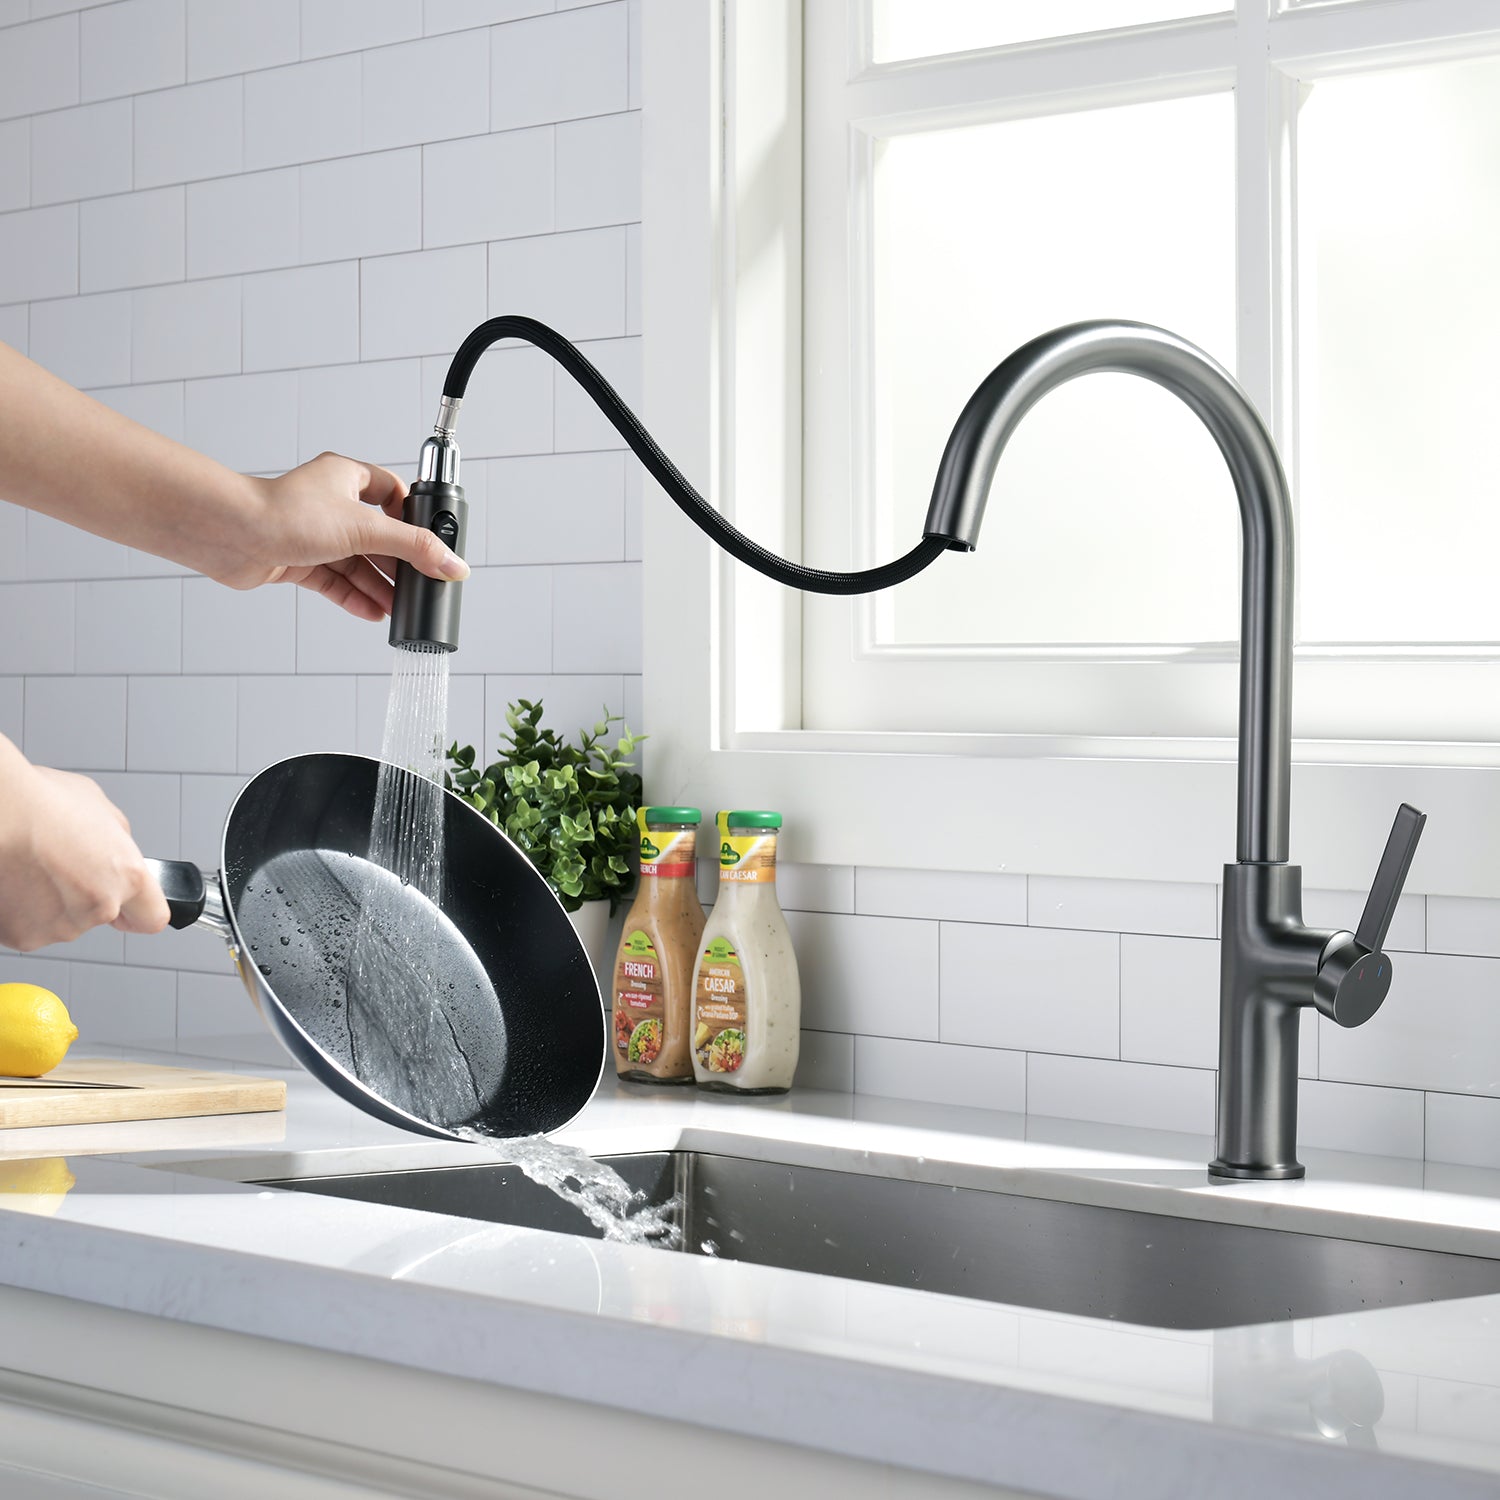 Lefton Single Handle Kitchen Pull-Down Faucet with 3 Water Outlet Modes-KF2202